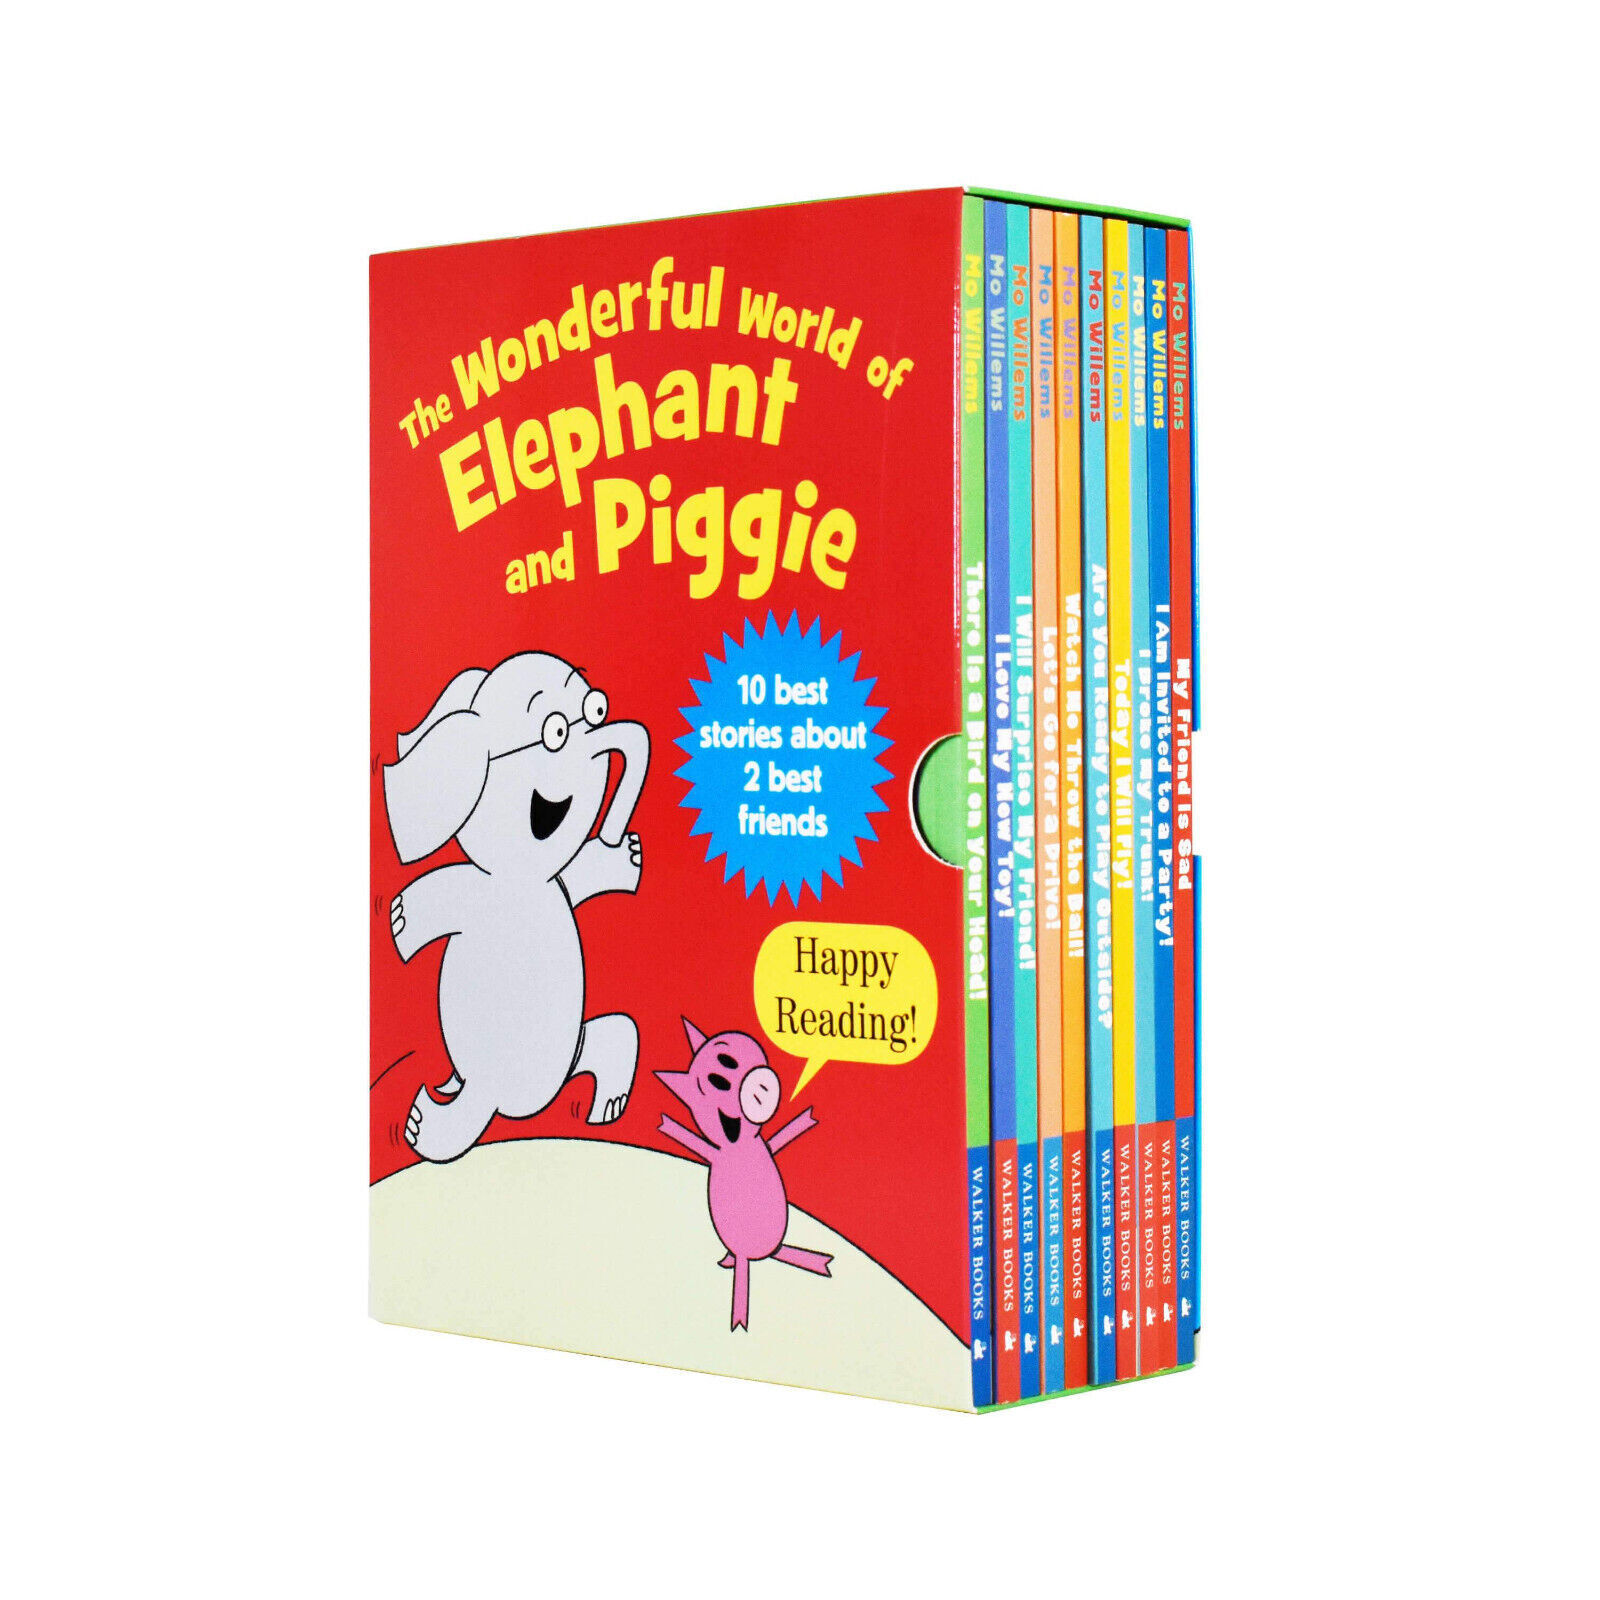 The Wonderful World of Elephant and Piggie 10 Bks Box Set by Mo Willems - 4+ -PB